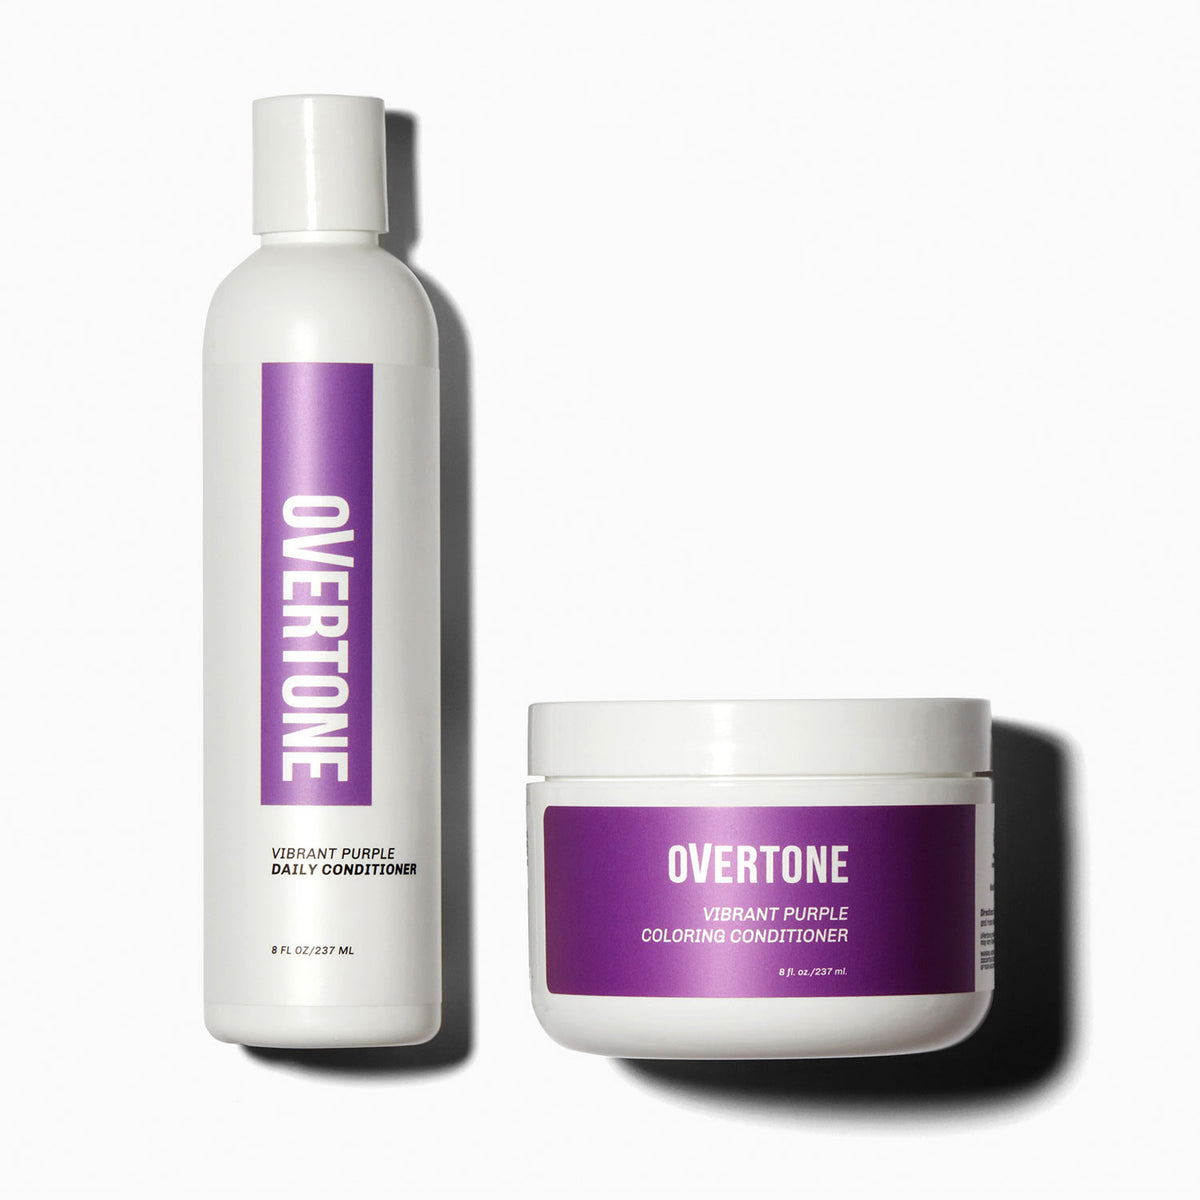 oVertone Vibrant Purple Hair Coloring Conditioner and Daily Conditioner 